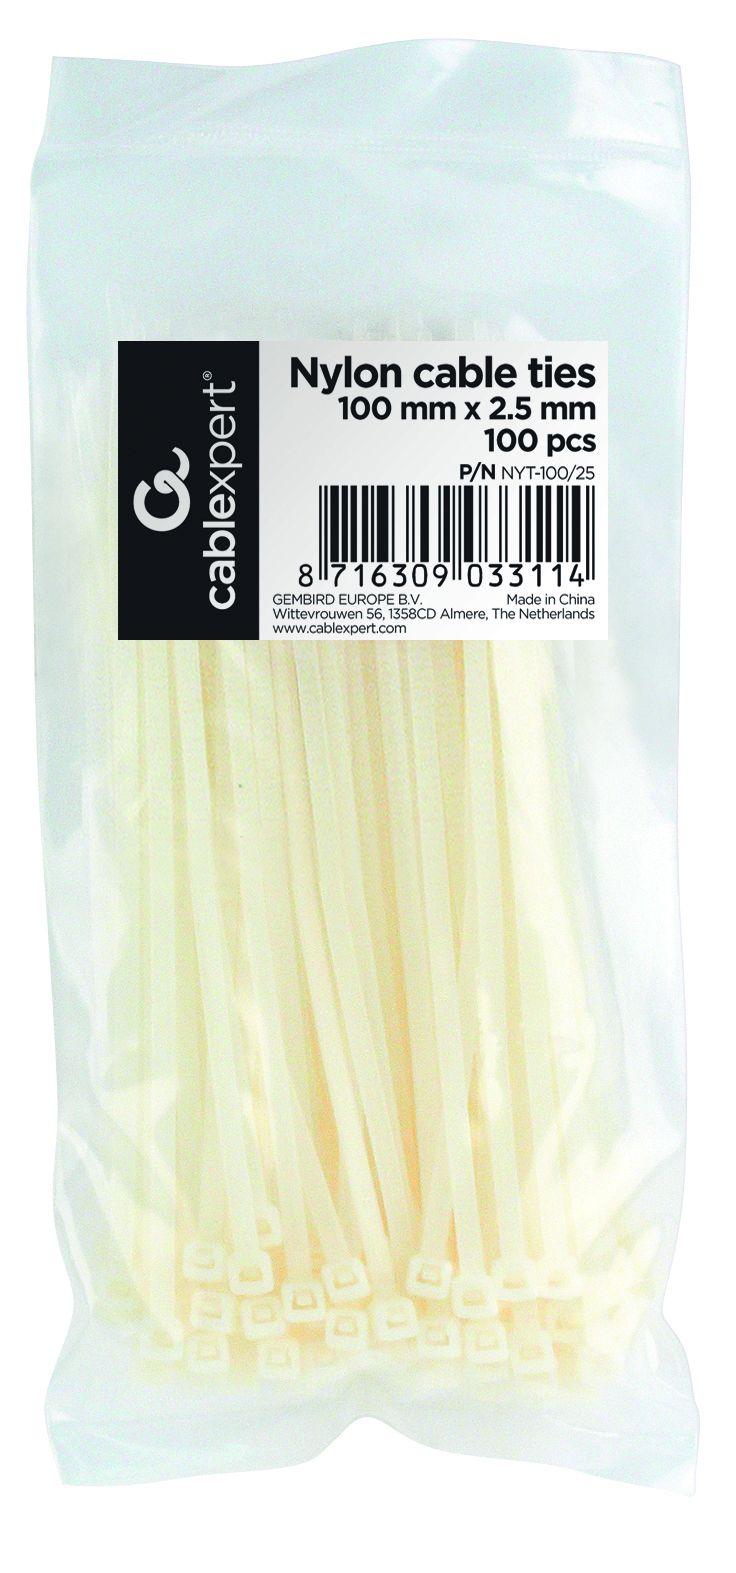 GEMBIRD NYT-100/25 nylon cable ties 100mm 2.5mm width bag of 100 pcs_1